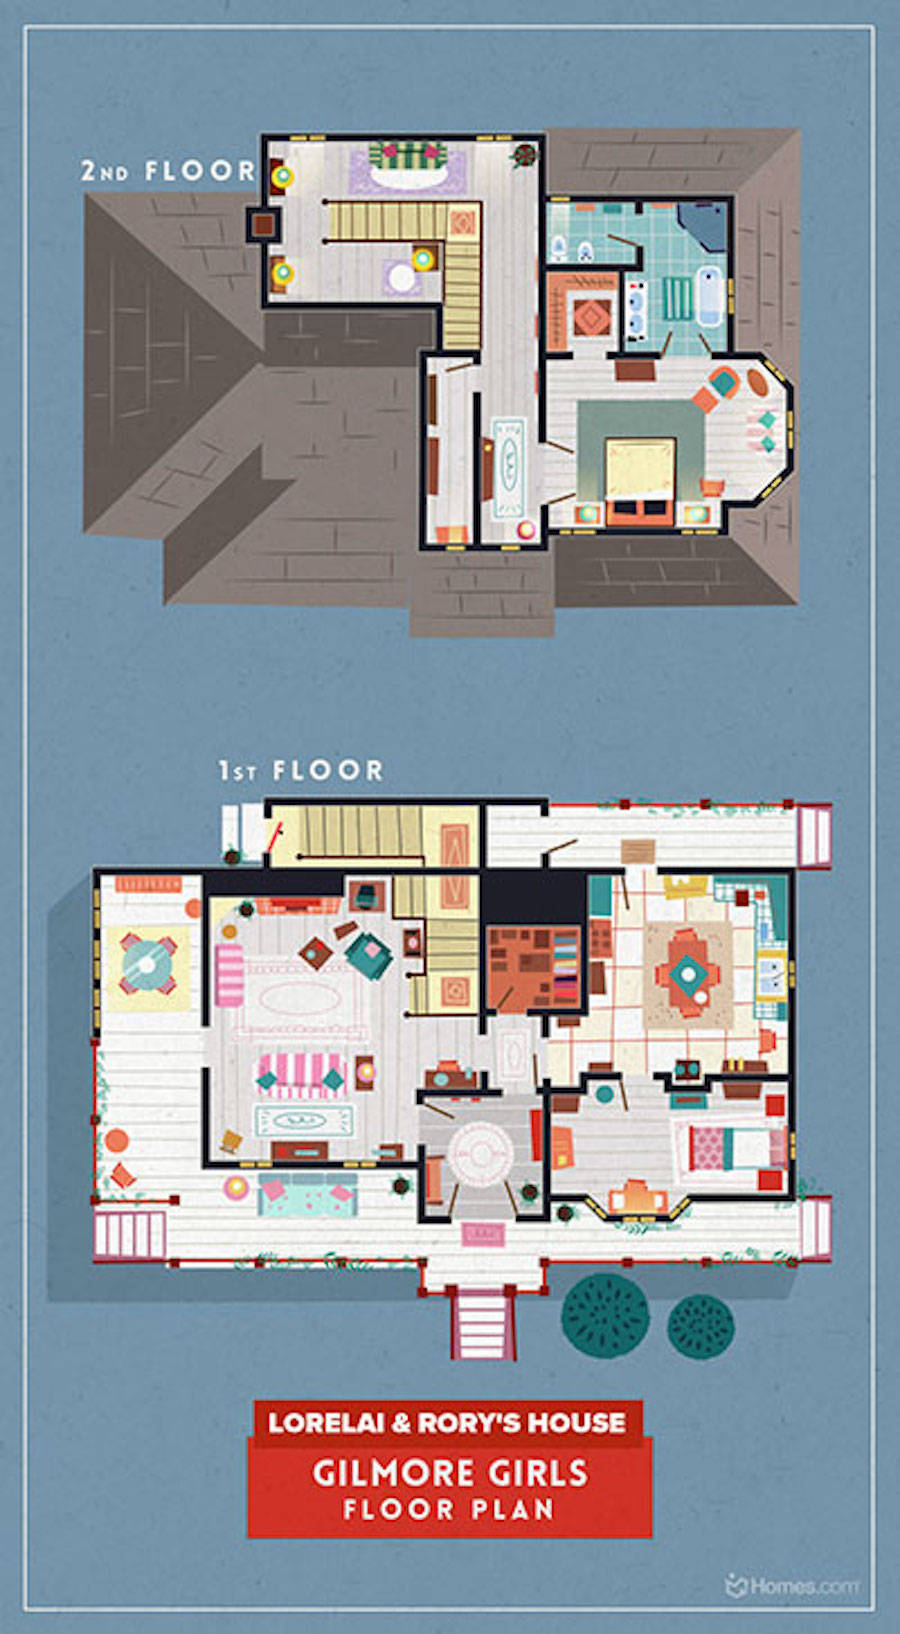 What is the importance of having floor plans?